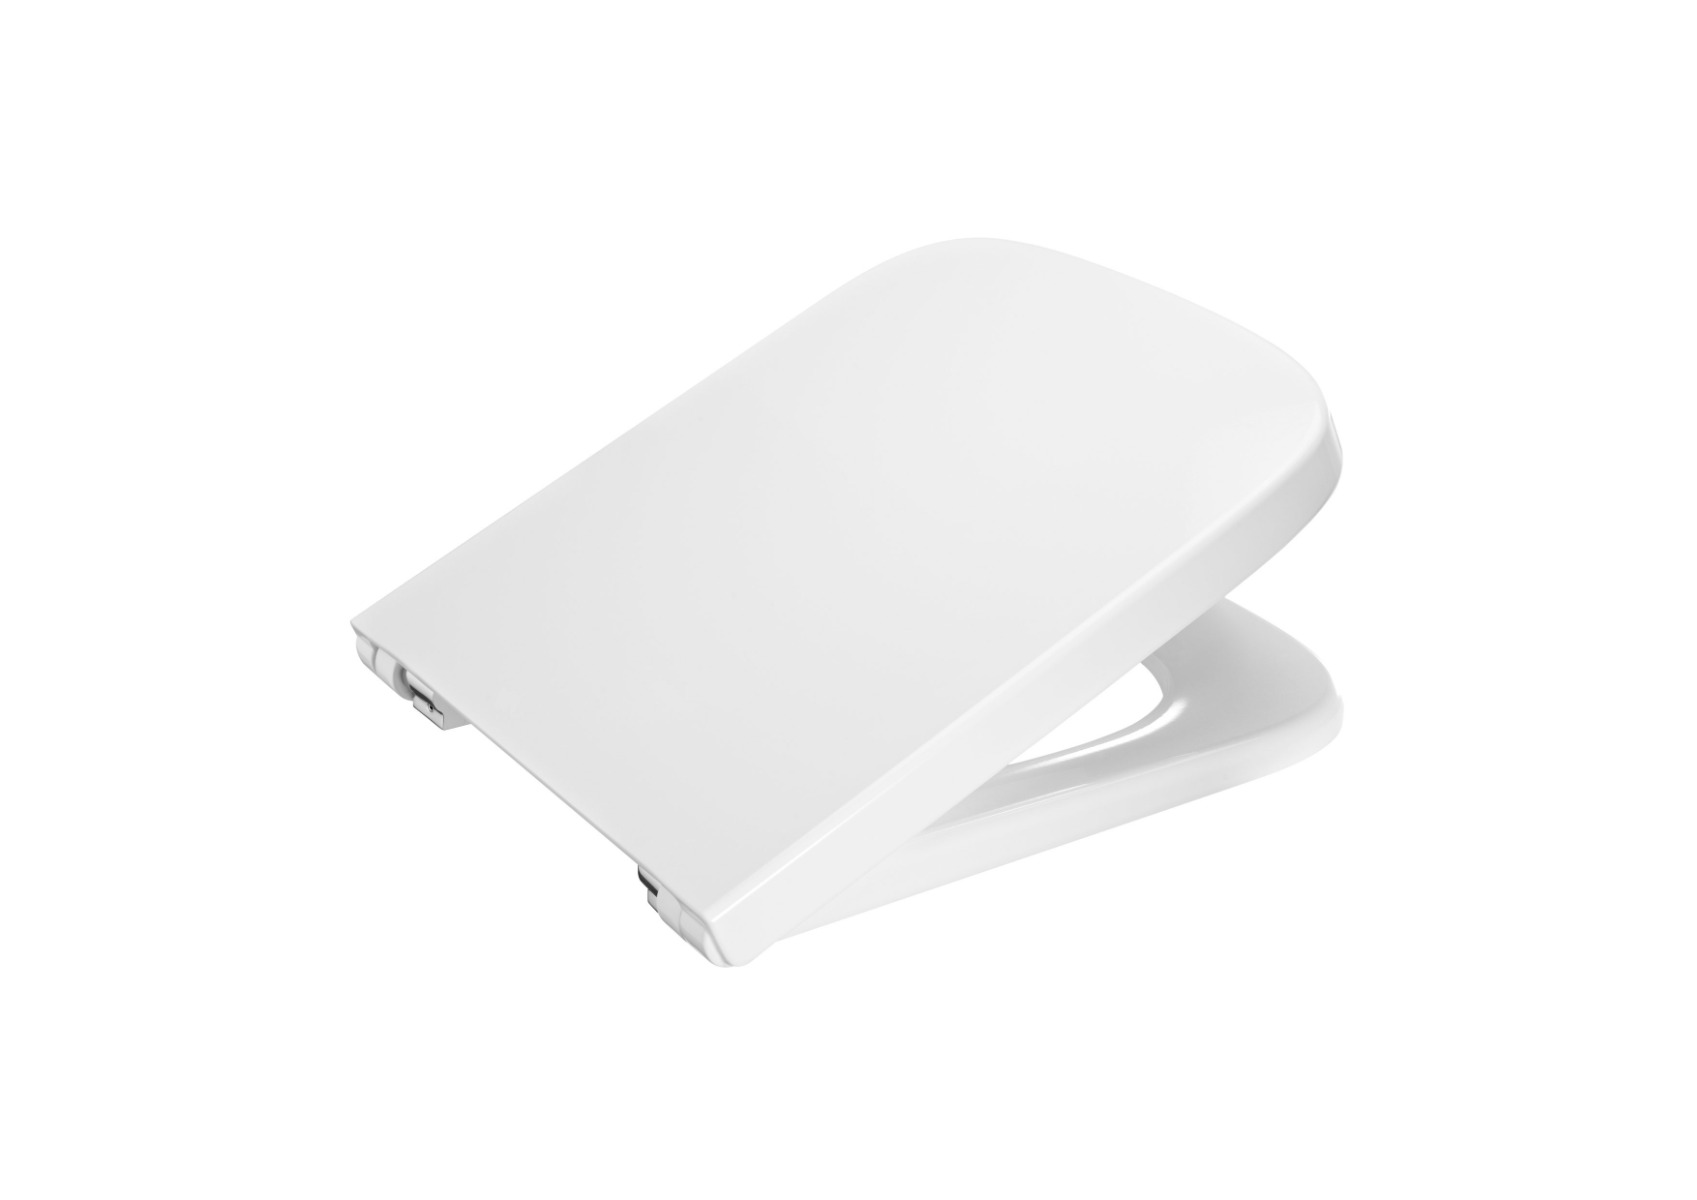 Soft-closing lacquered toilet seat and cover A80178B004